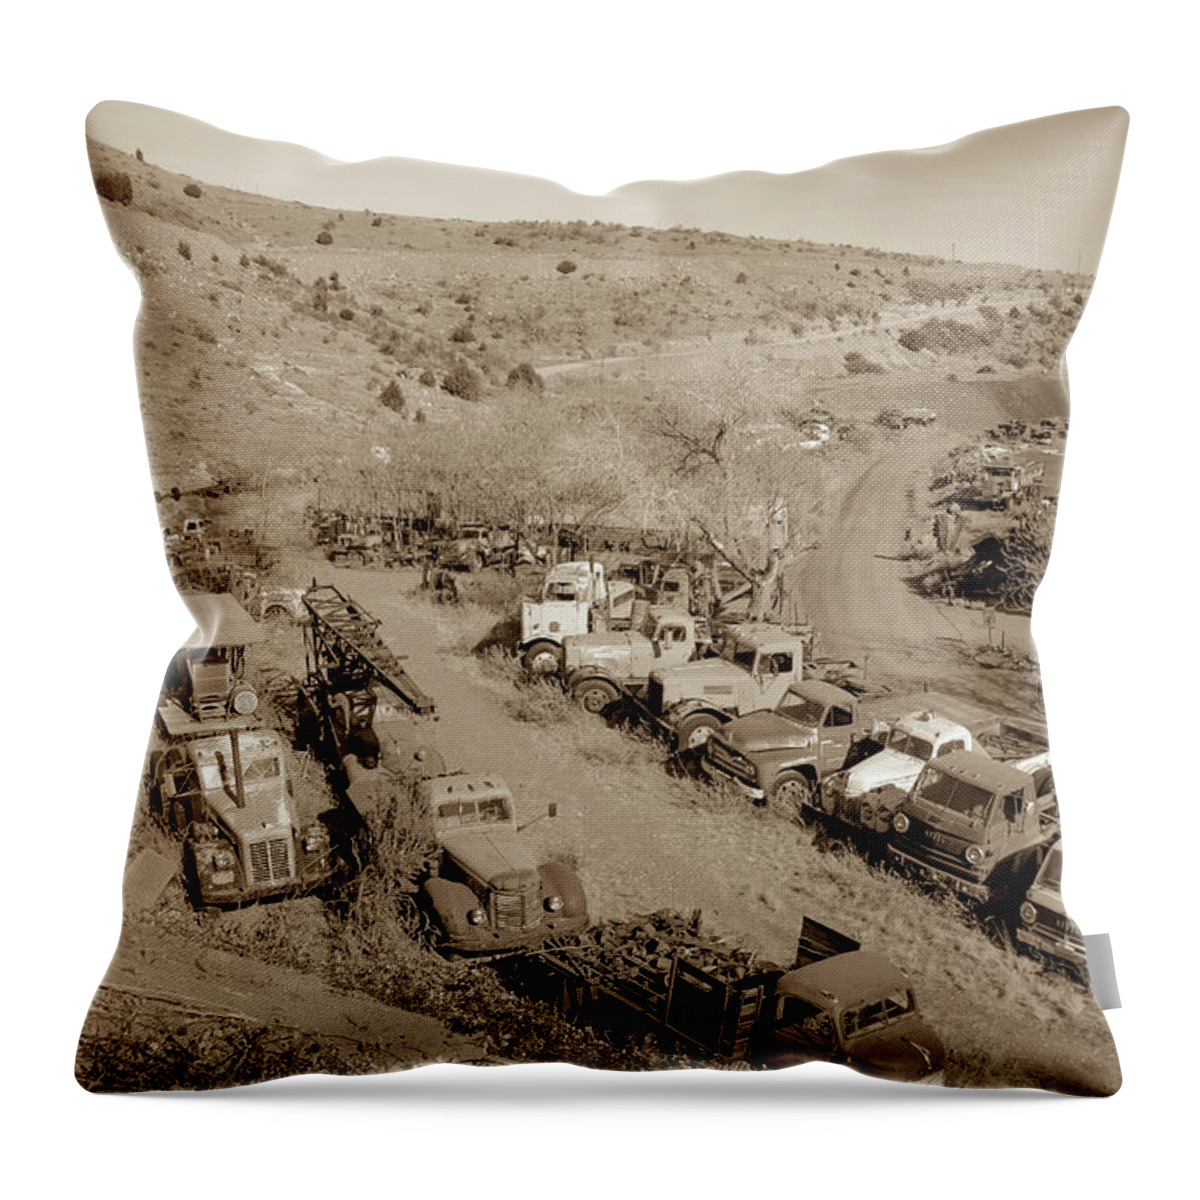 Vintage Throw Pillow featuring the photograph Vintage Truck yard by Darrell Foster